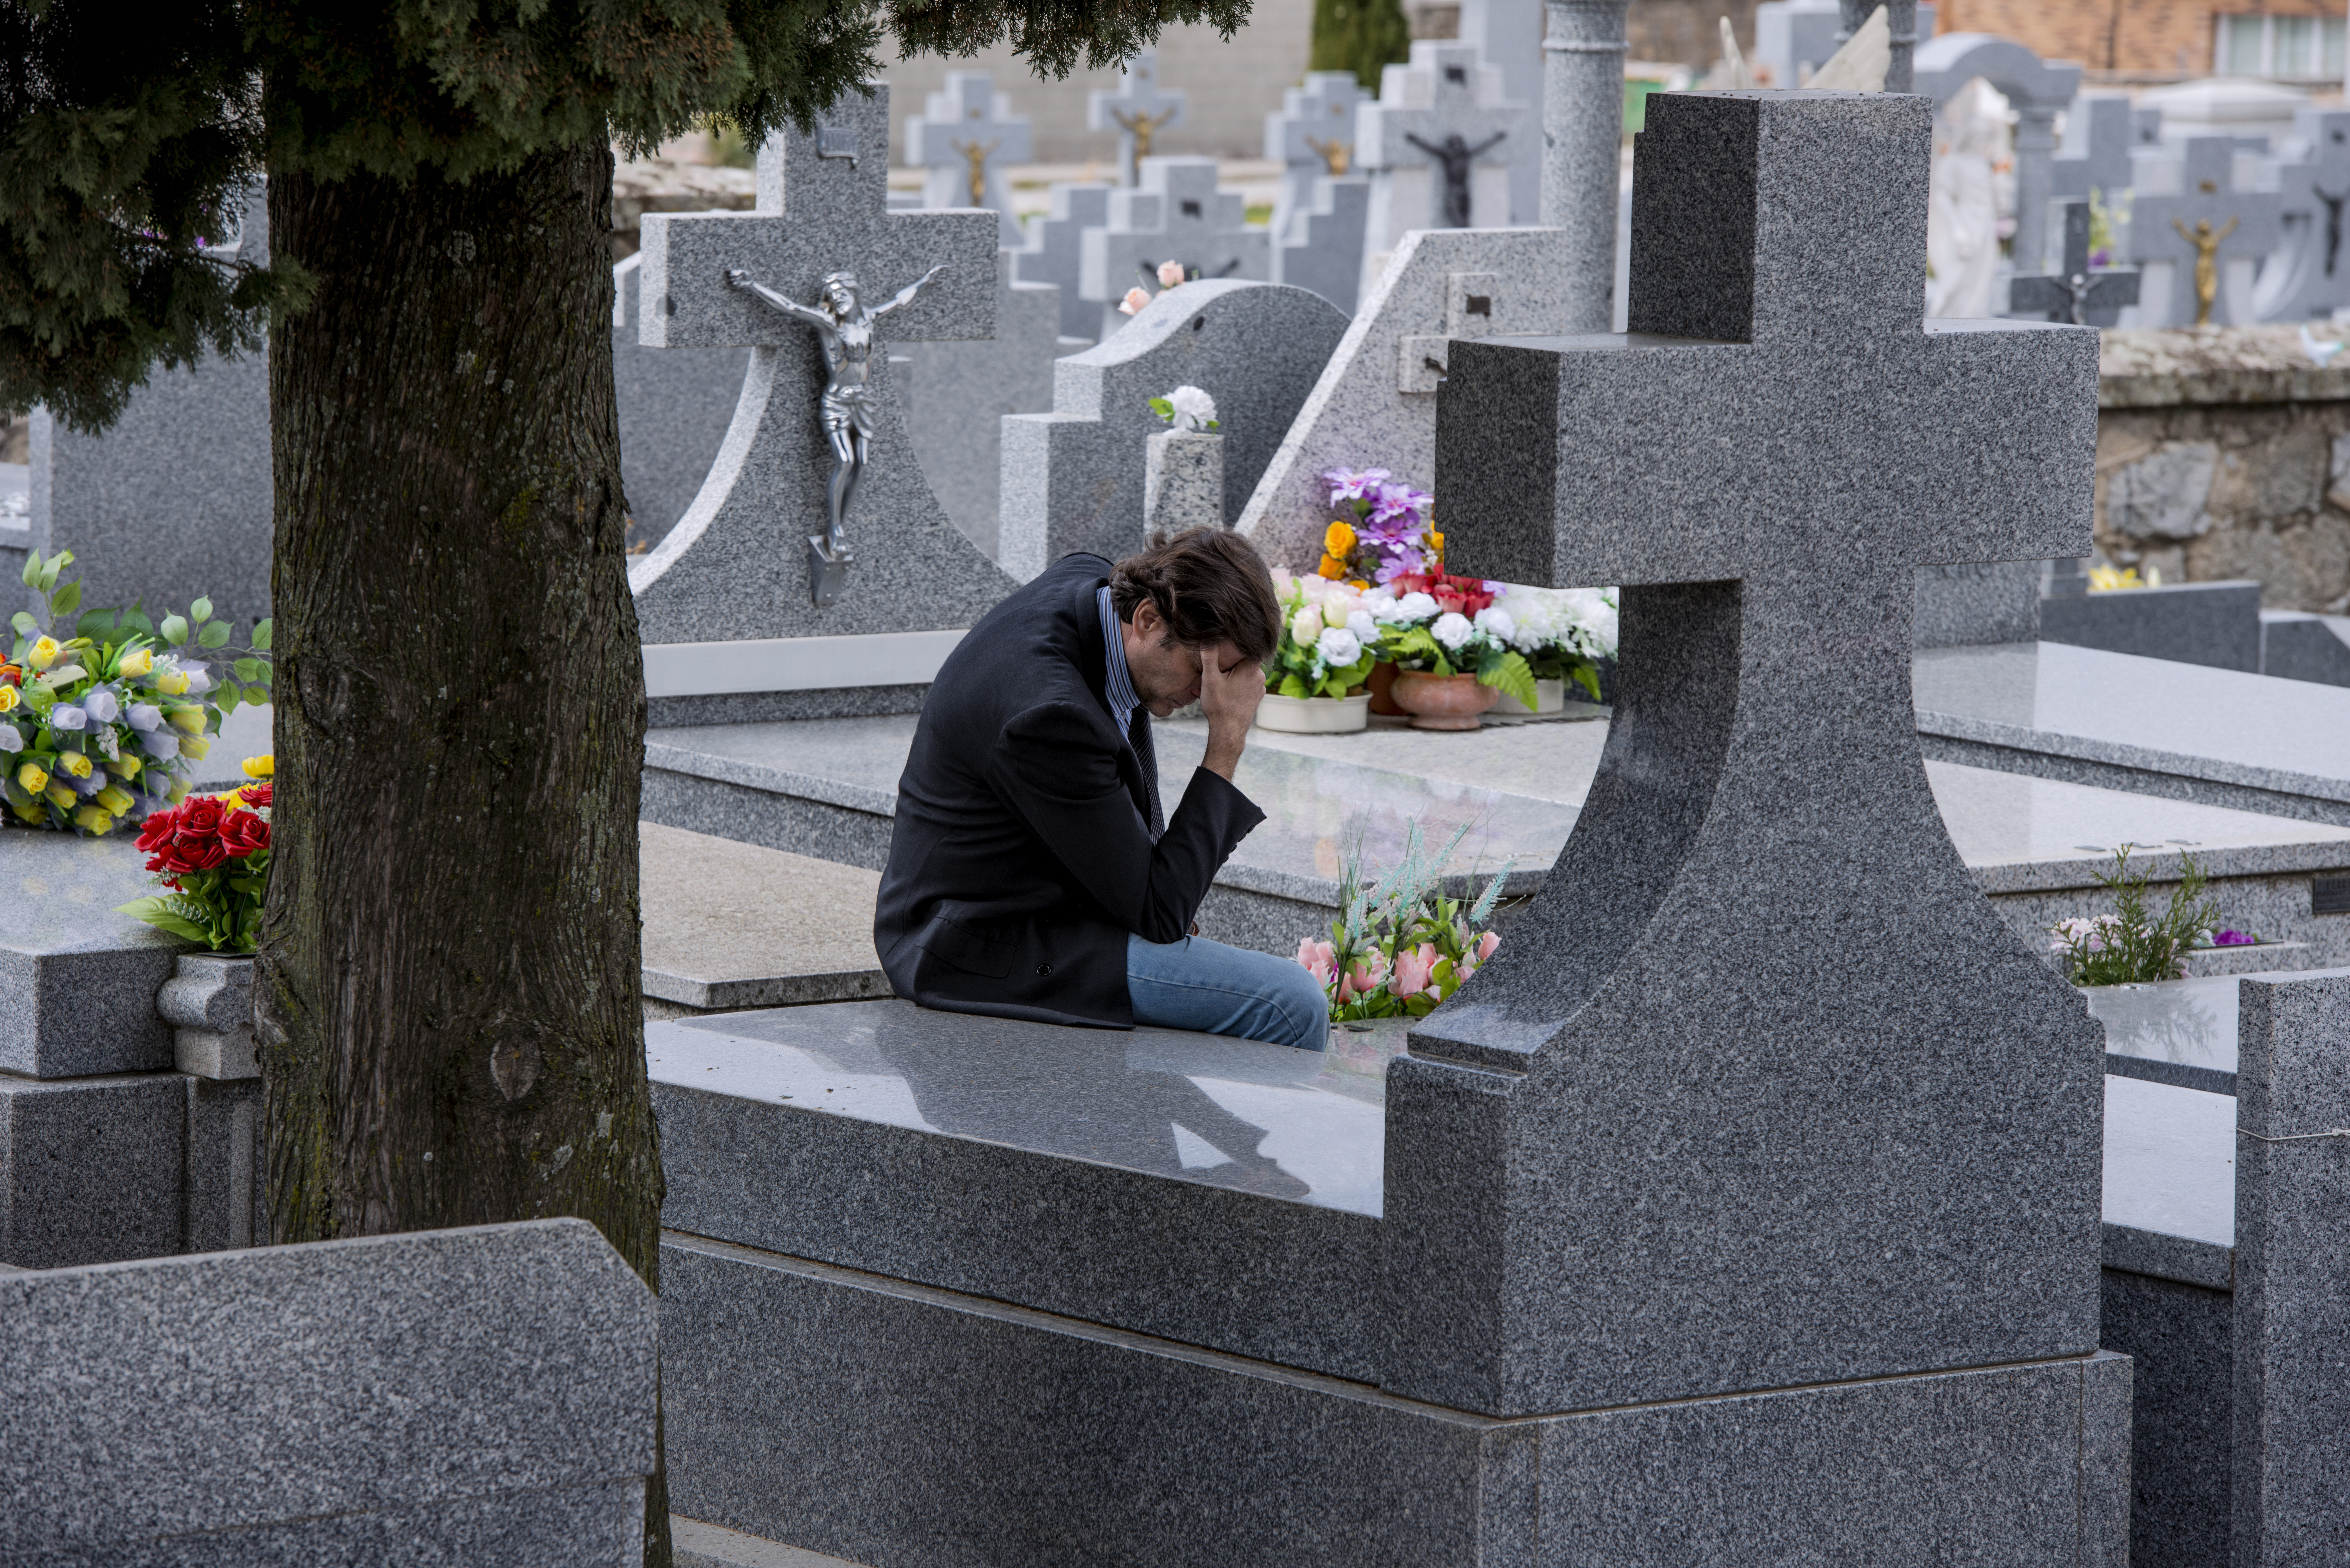 A man sitting in front of a grave | Source: Shutterstock